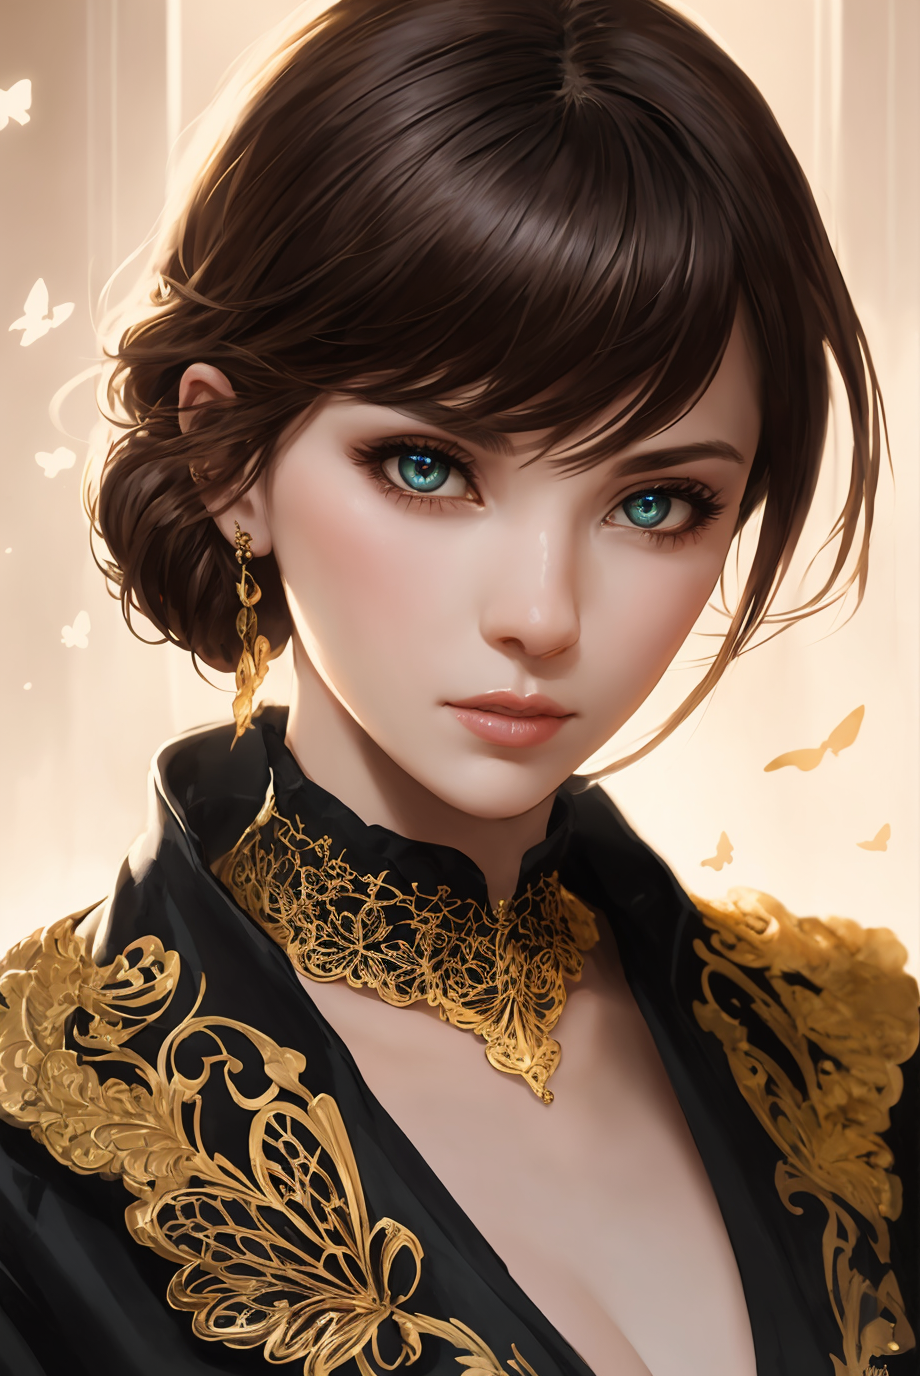 8k portrait of beautiful cyborg with brown hair, intricate, elegant, highly detailed, majestic, digital photography, art b...